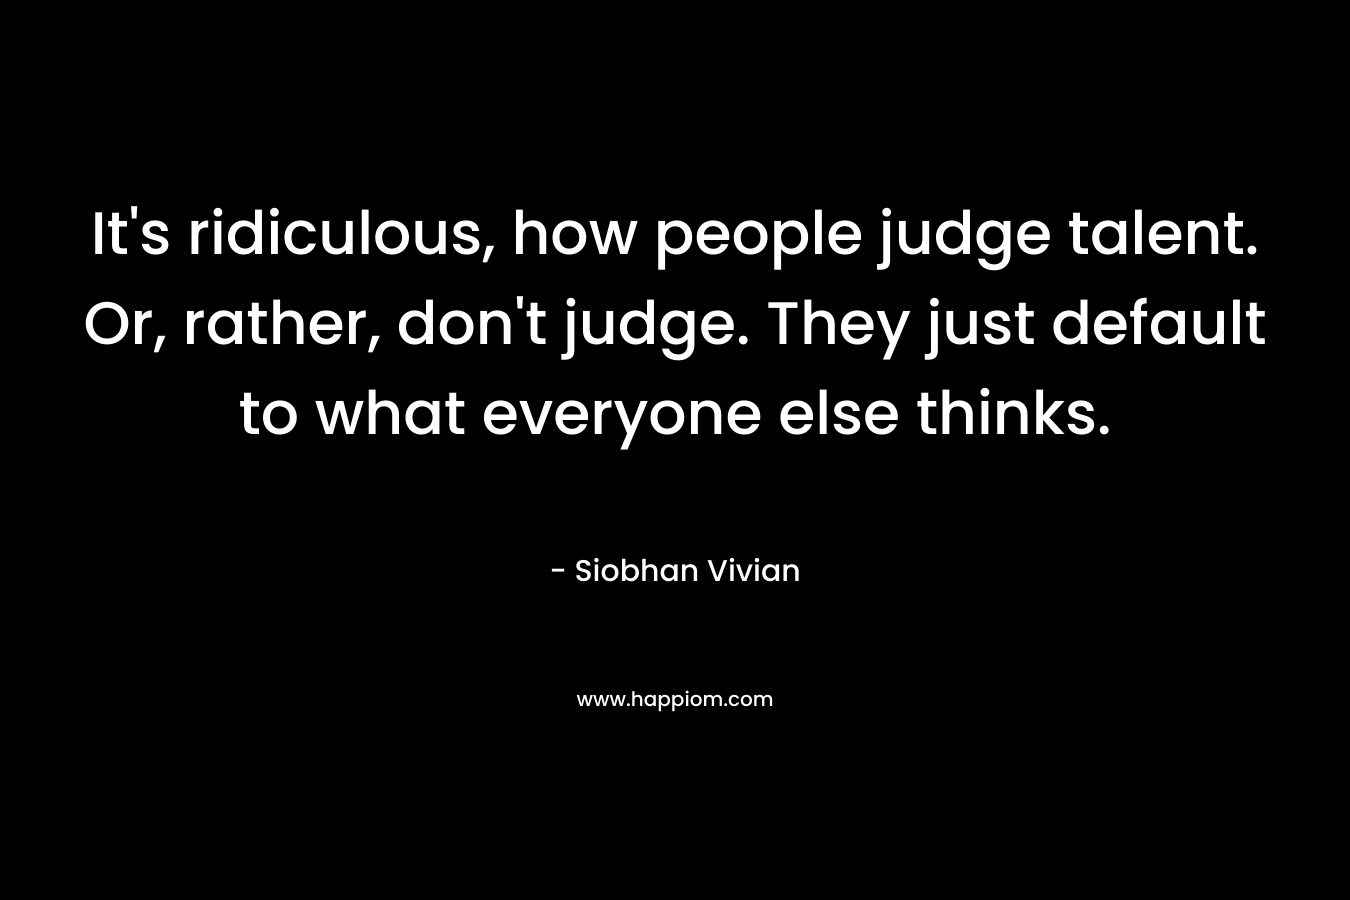 It's ridiculous, how people judge talent. Or, rather, don't judge. They just default to what everyone else thinks.